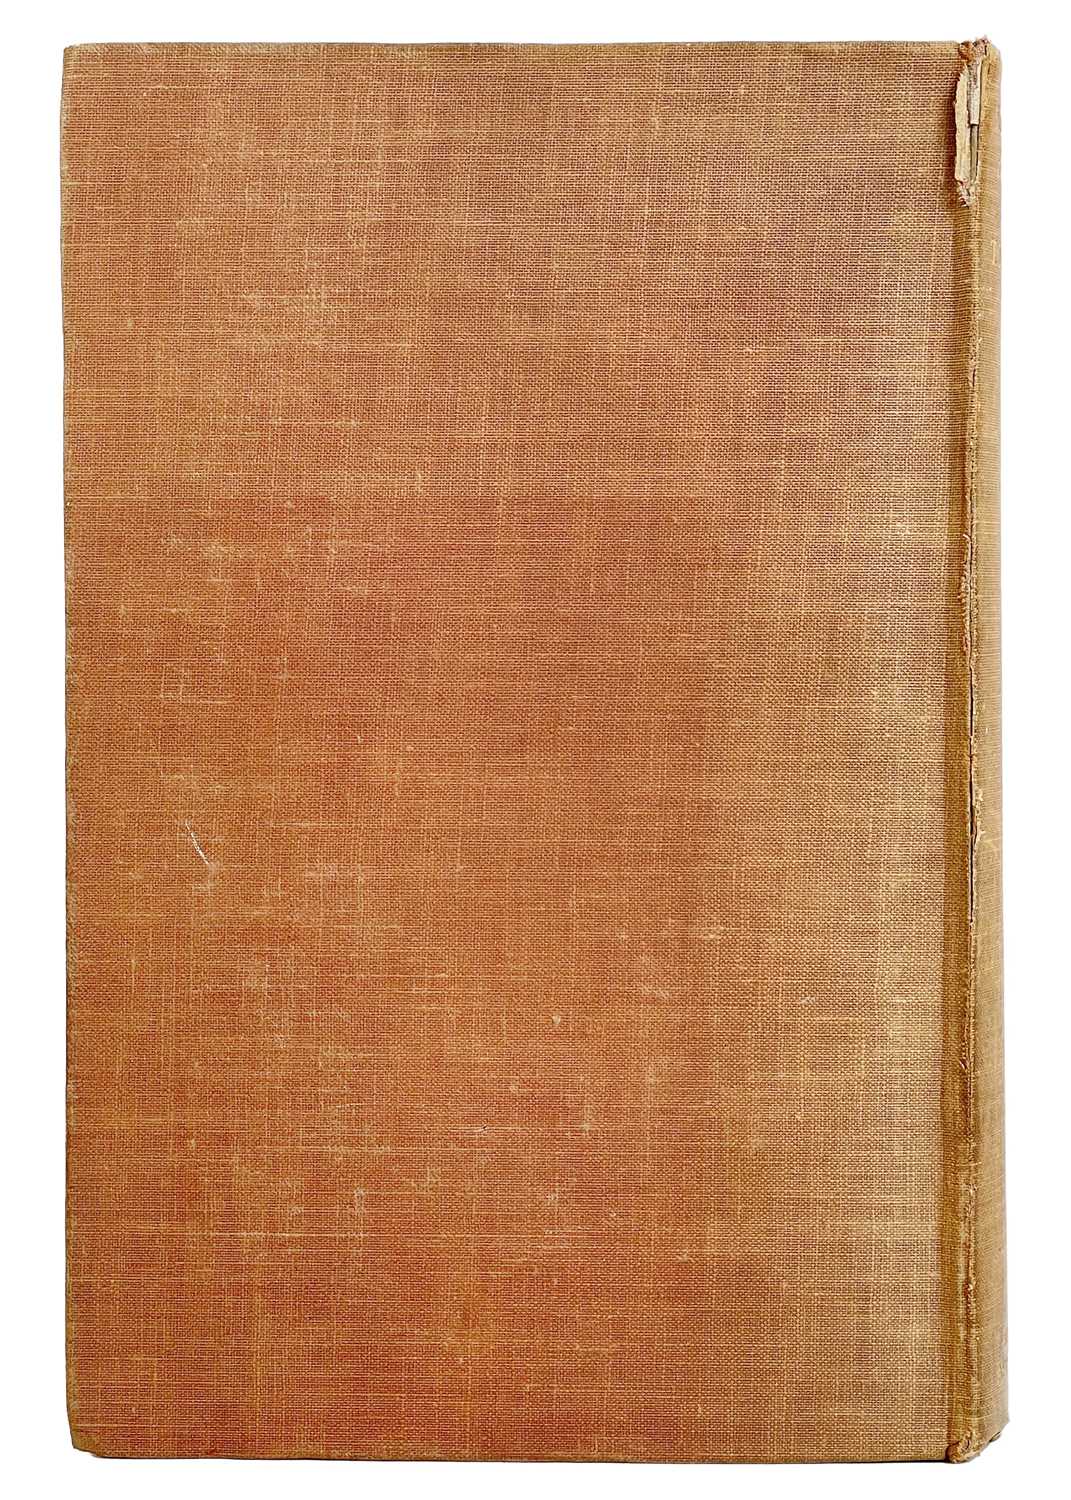 T. S. Eliot. 'Selected Essays 1917-1932,' first edition, lacks dj, original cloth, ink owner - Image 10 of 10